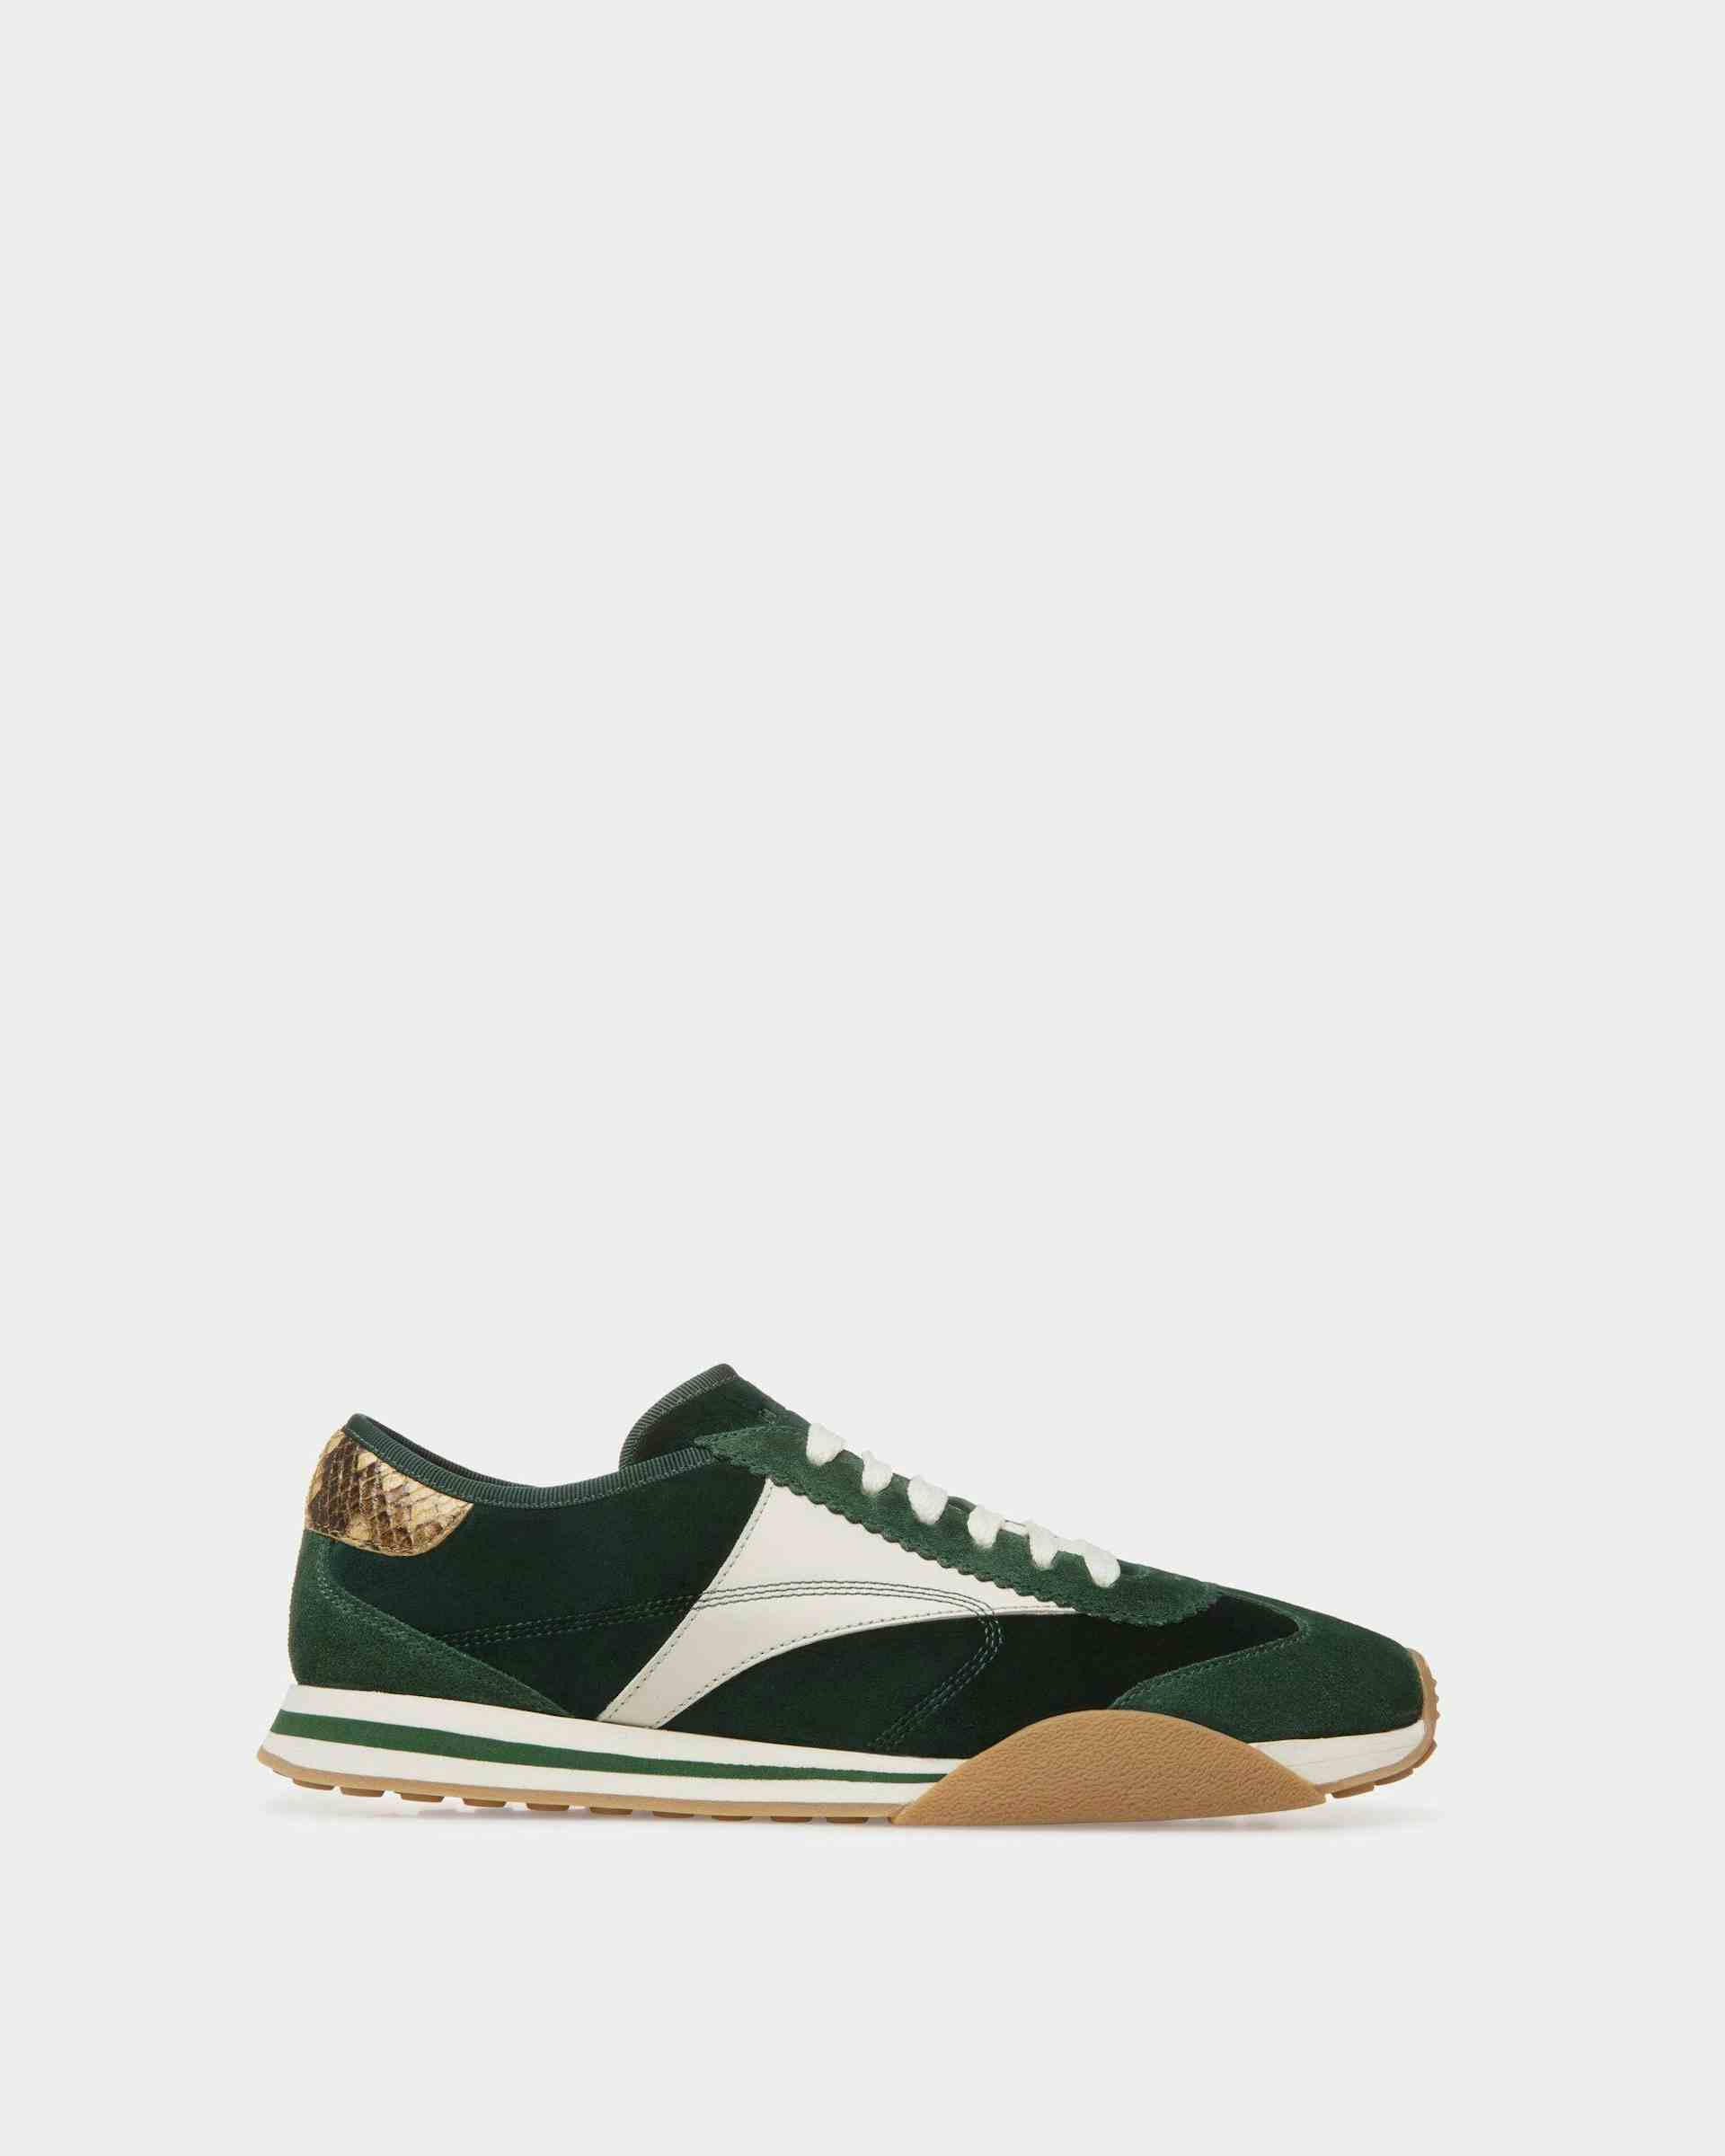 Sussex Sneakers In Green And Dusty White Leather And Cotton - Men's - Bally